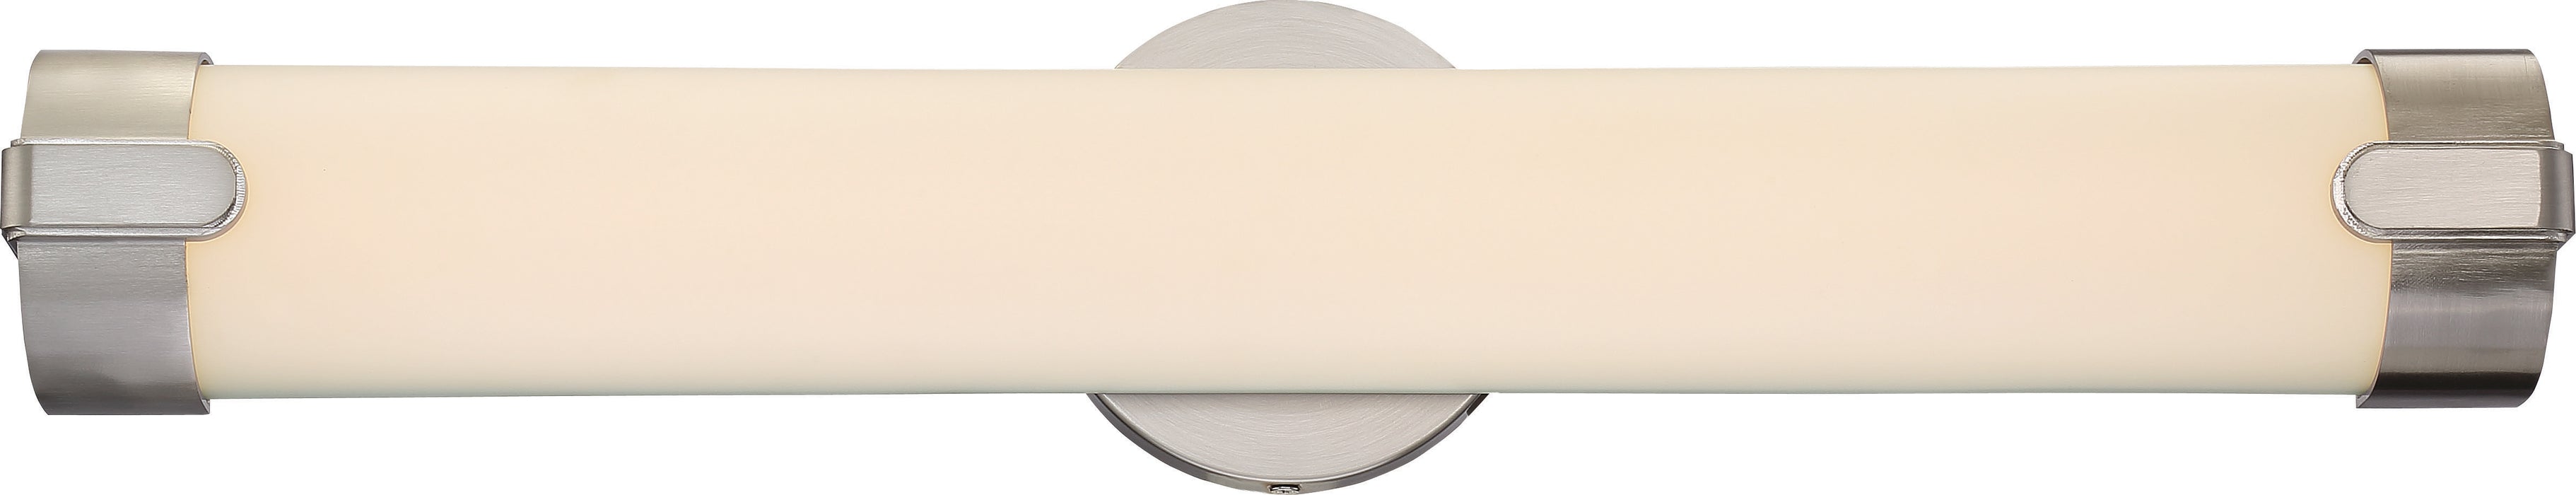 SATCO/NUVO Loop Double LED Wall Sconce Brushed Nickel Finish (62-922)